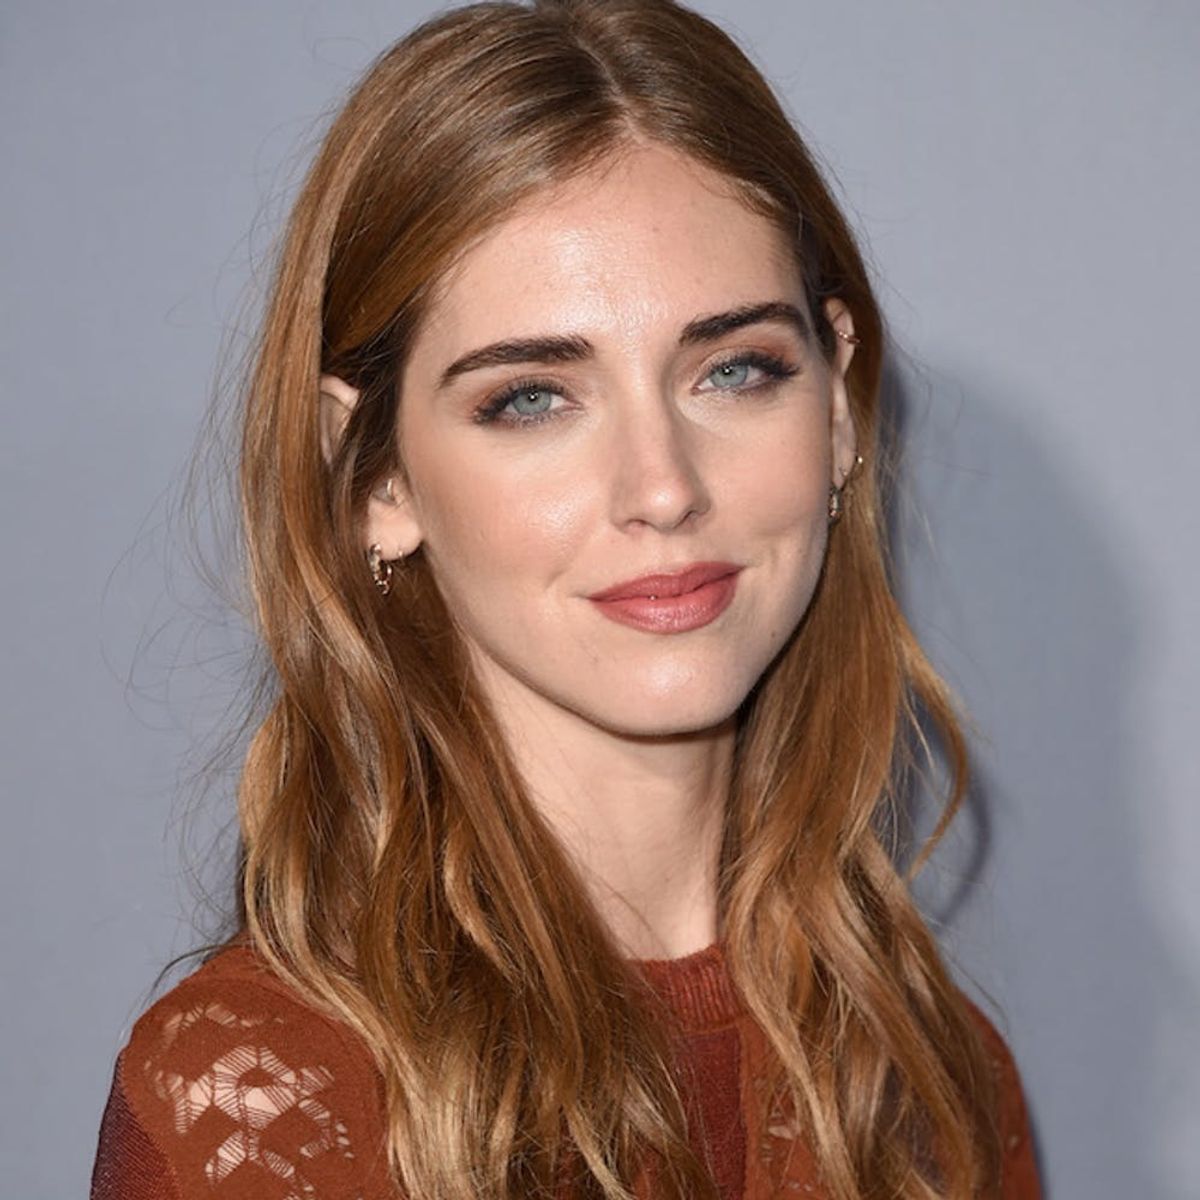 Get the Look of Chiara Ferragni’s Quirky Home